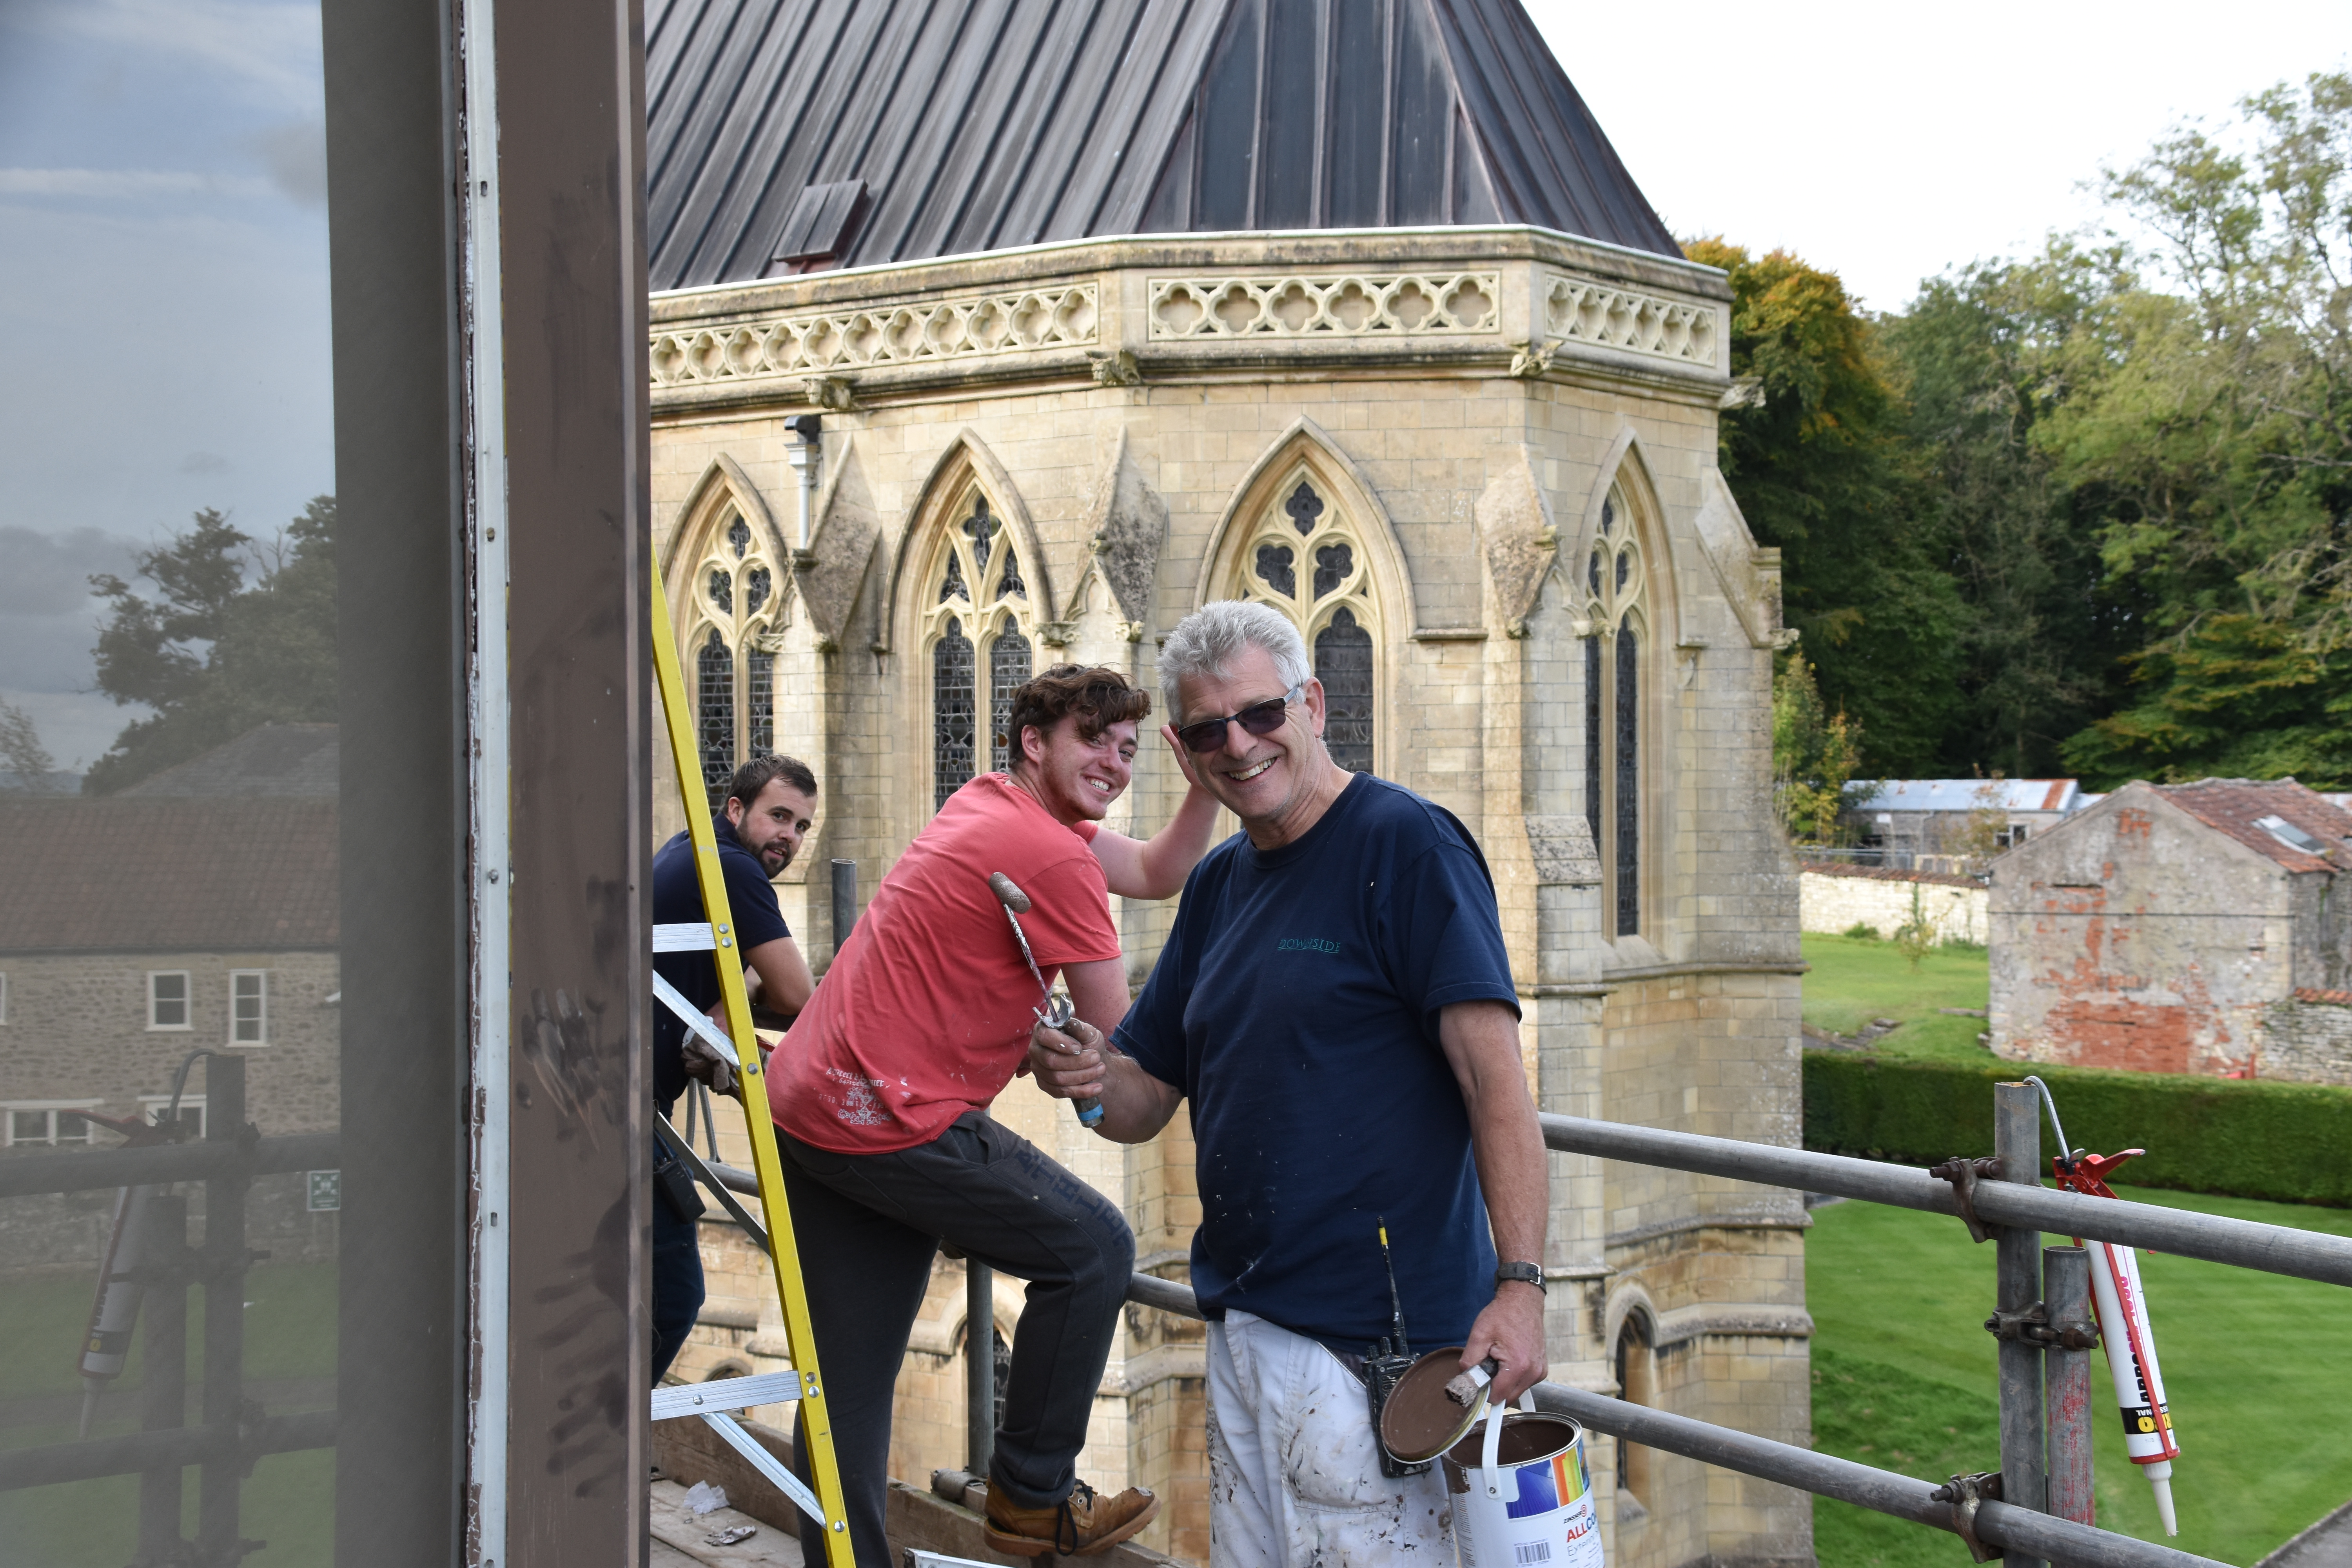 Workers installing new windows in Monastic library